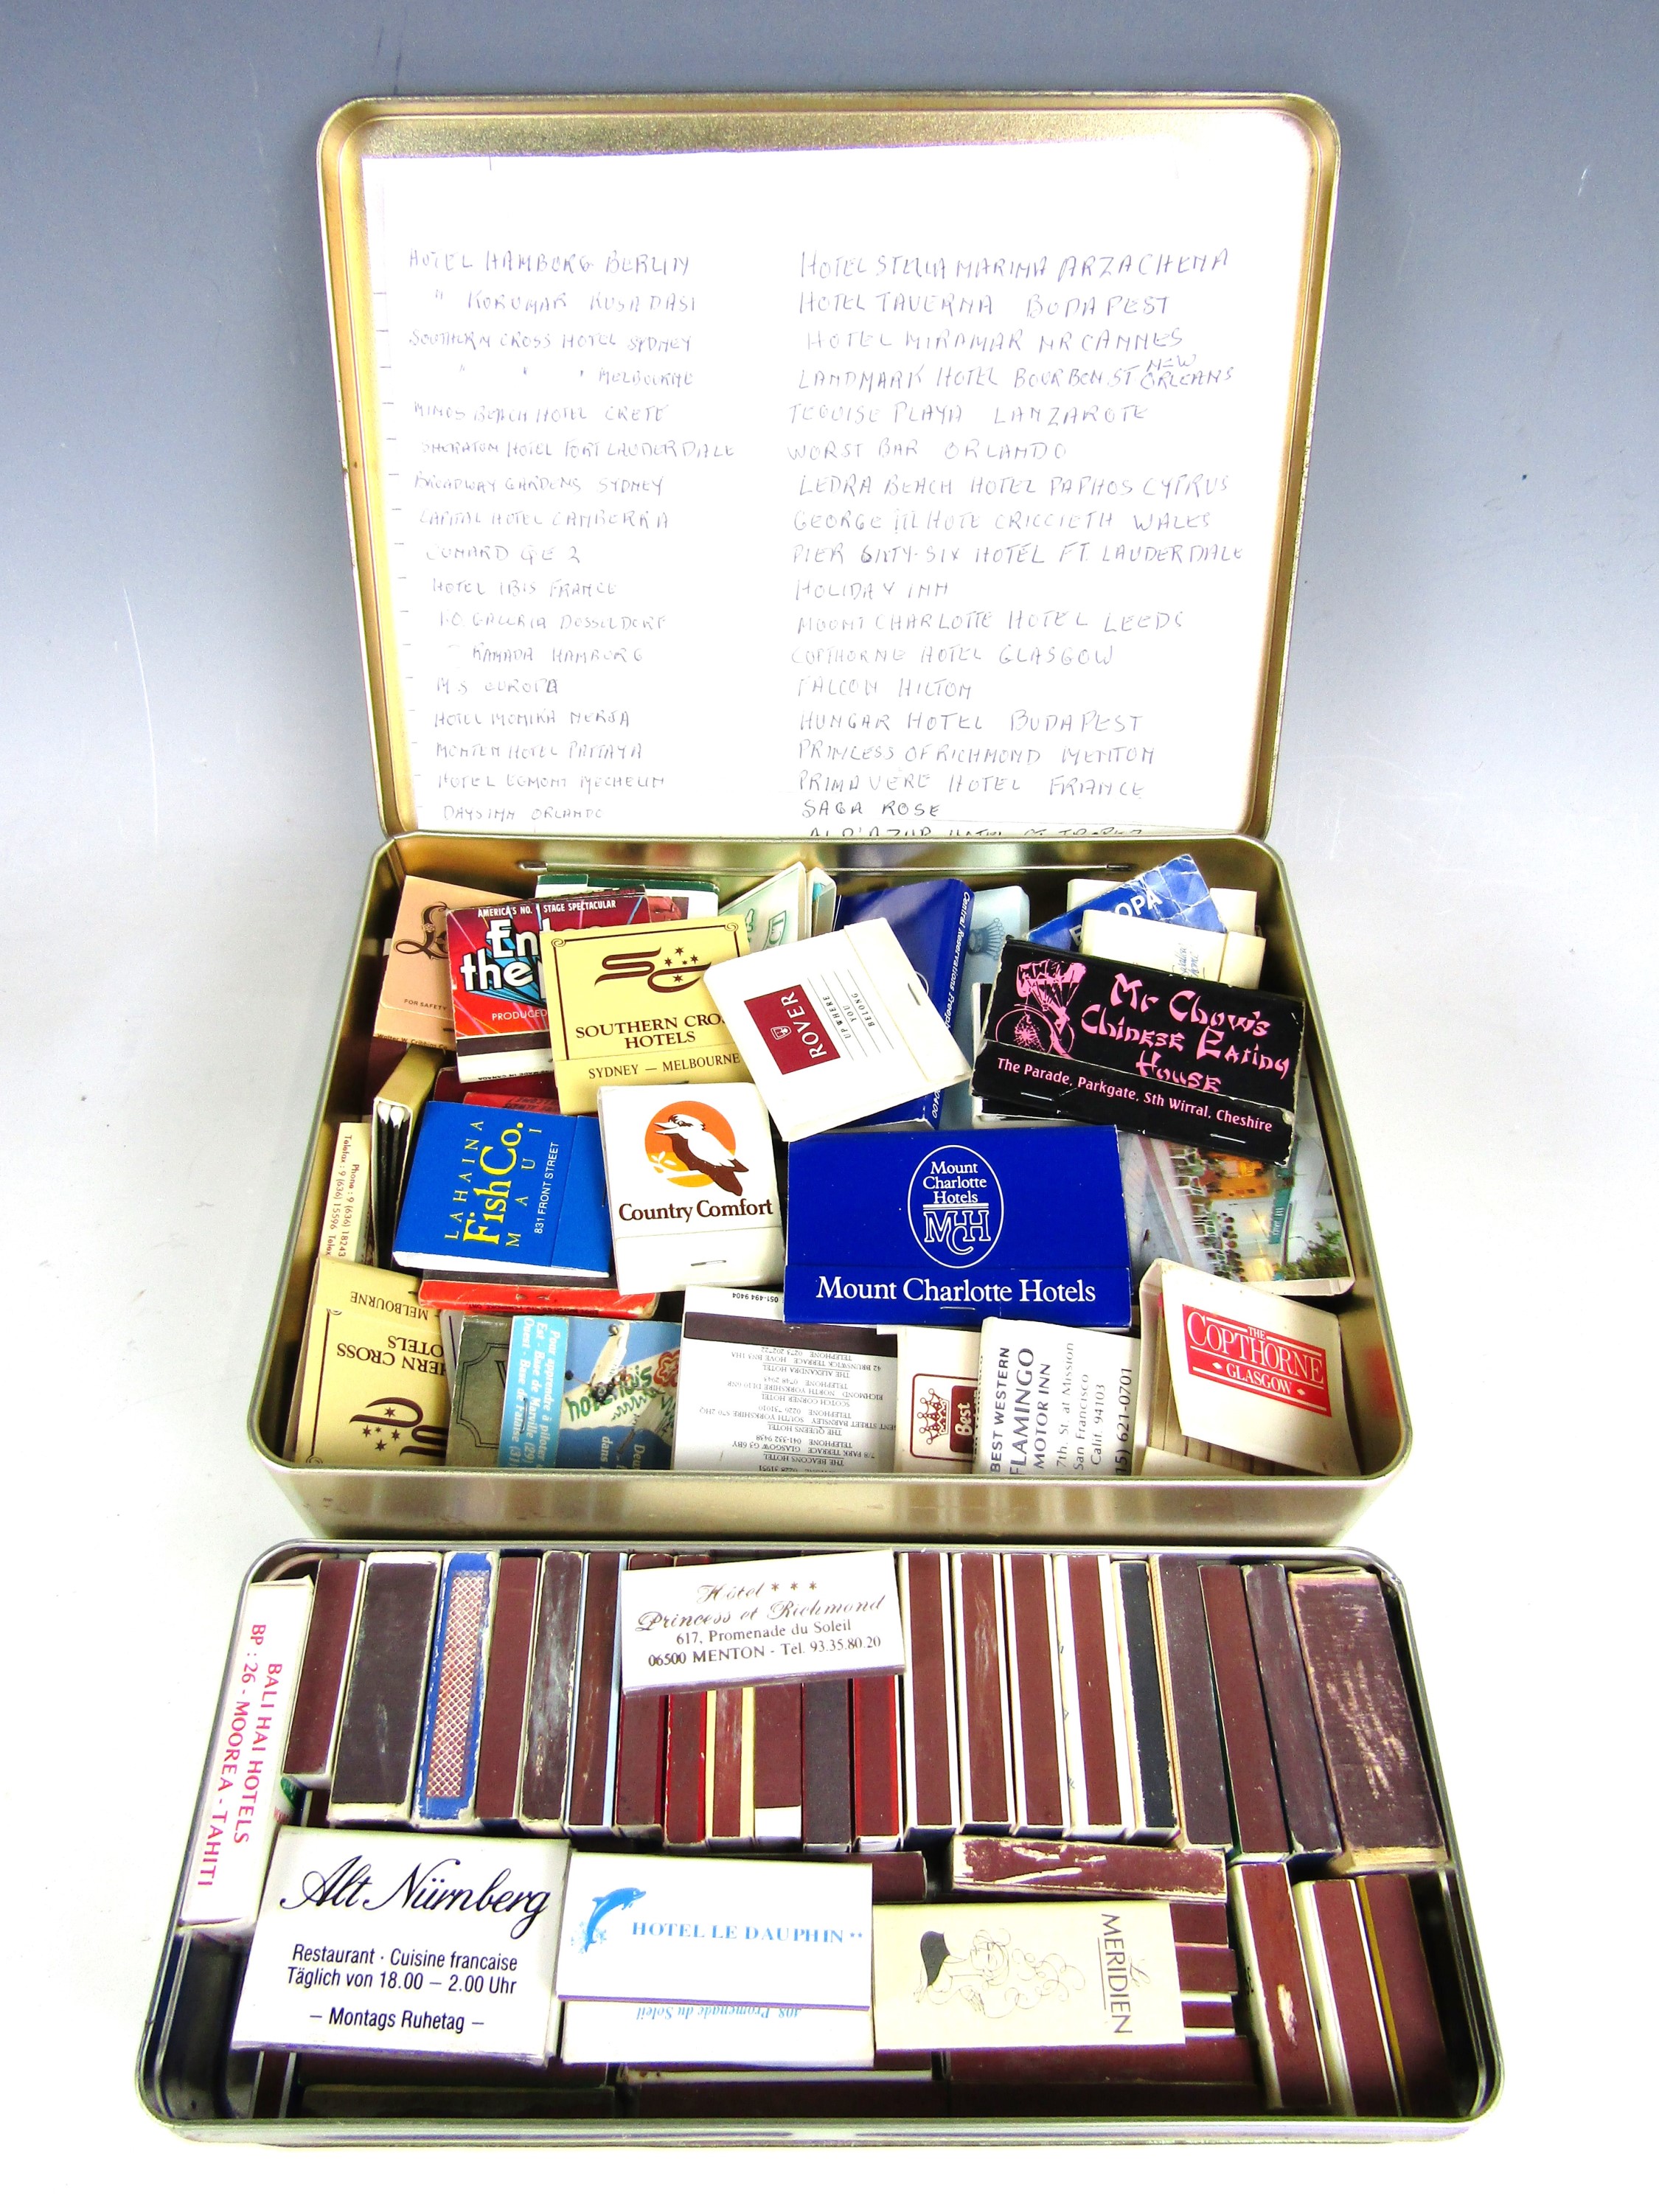 A large collection of vintage match boxes and match books